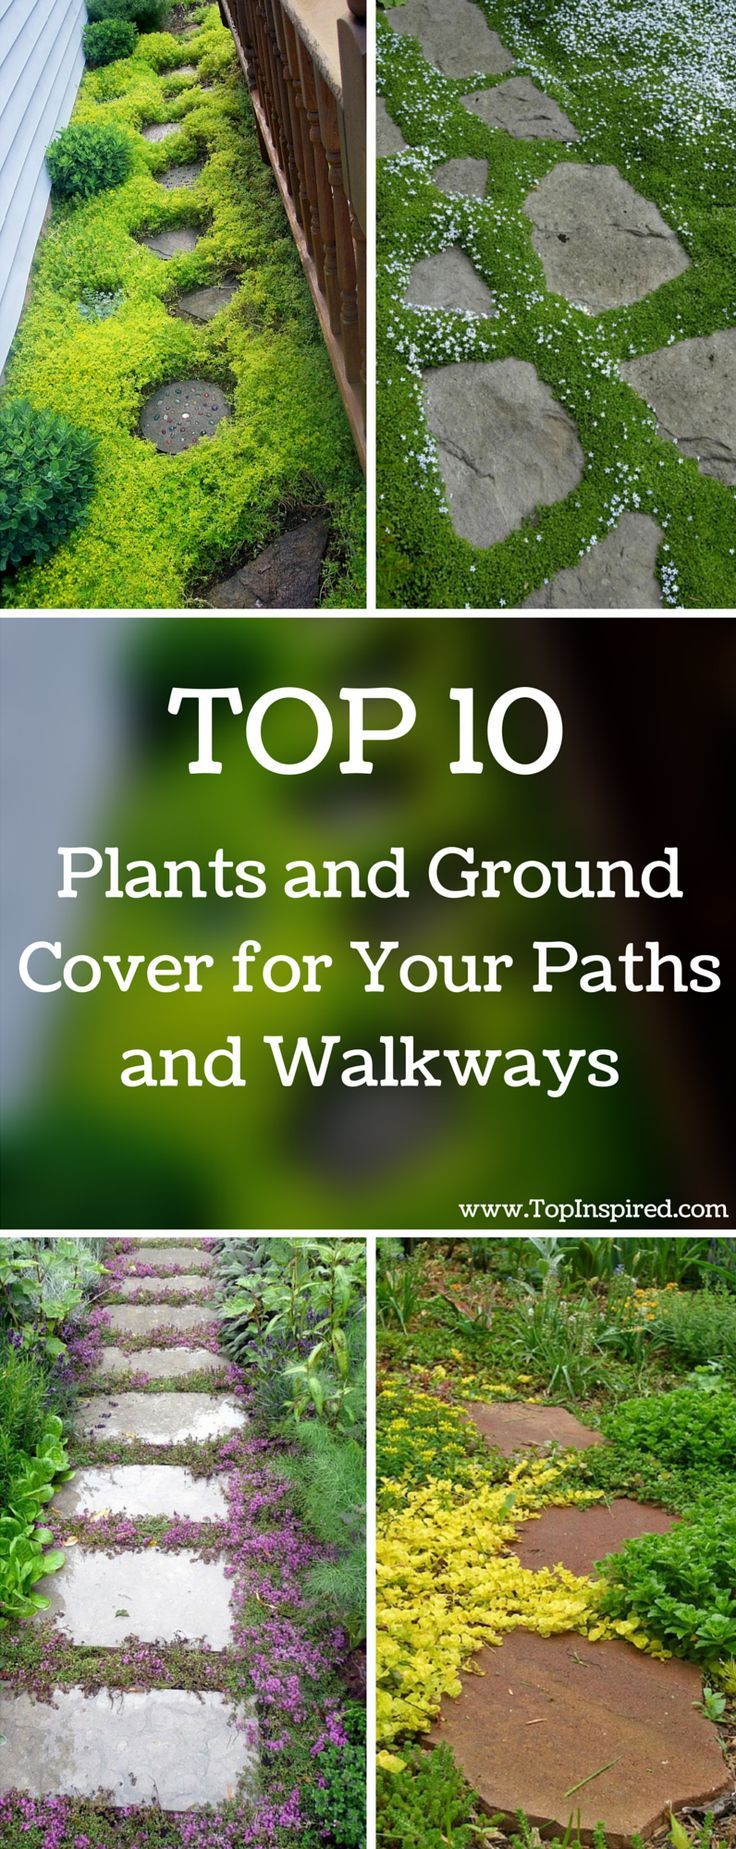 TOP 10 Plants and Ground Cover for Your Paths and Walkways